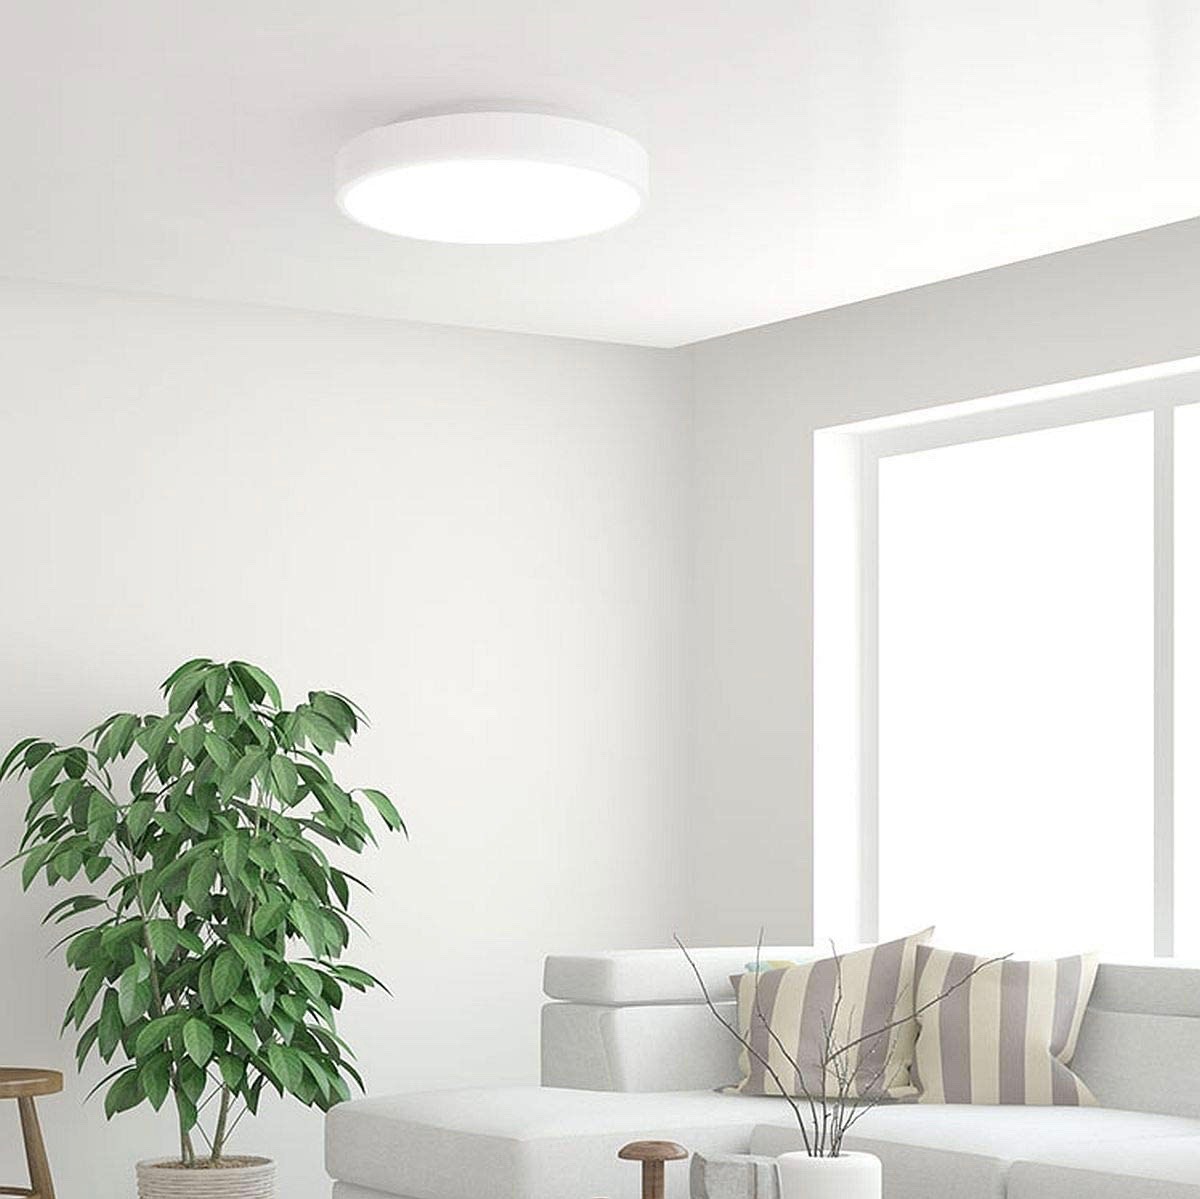 133,95 € Free Shipping | Indoor ceiling light 25W 6500K Cold light. Ø 32 cm. LED. Remote control Metal casting. White Color